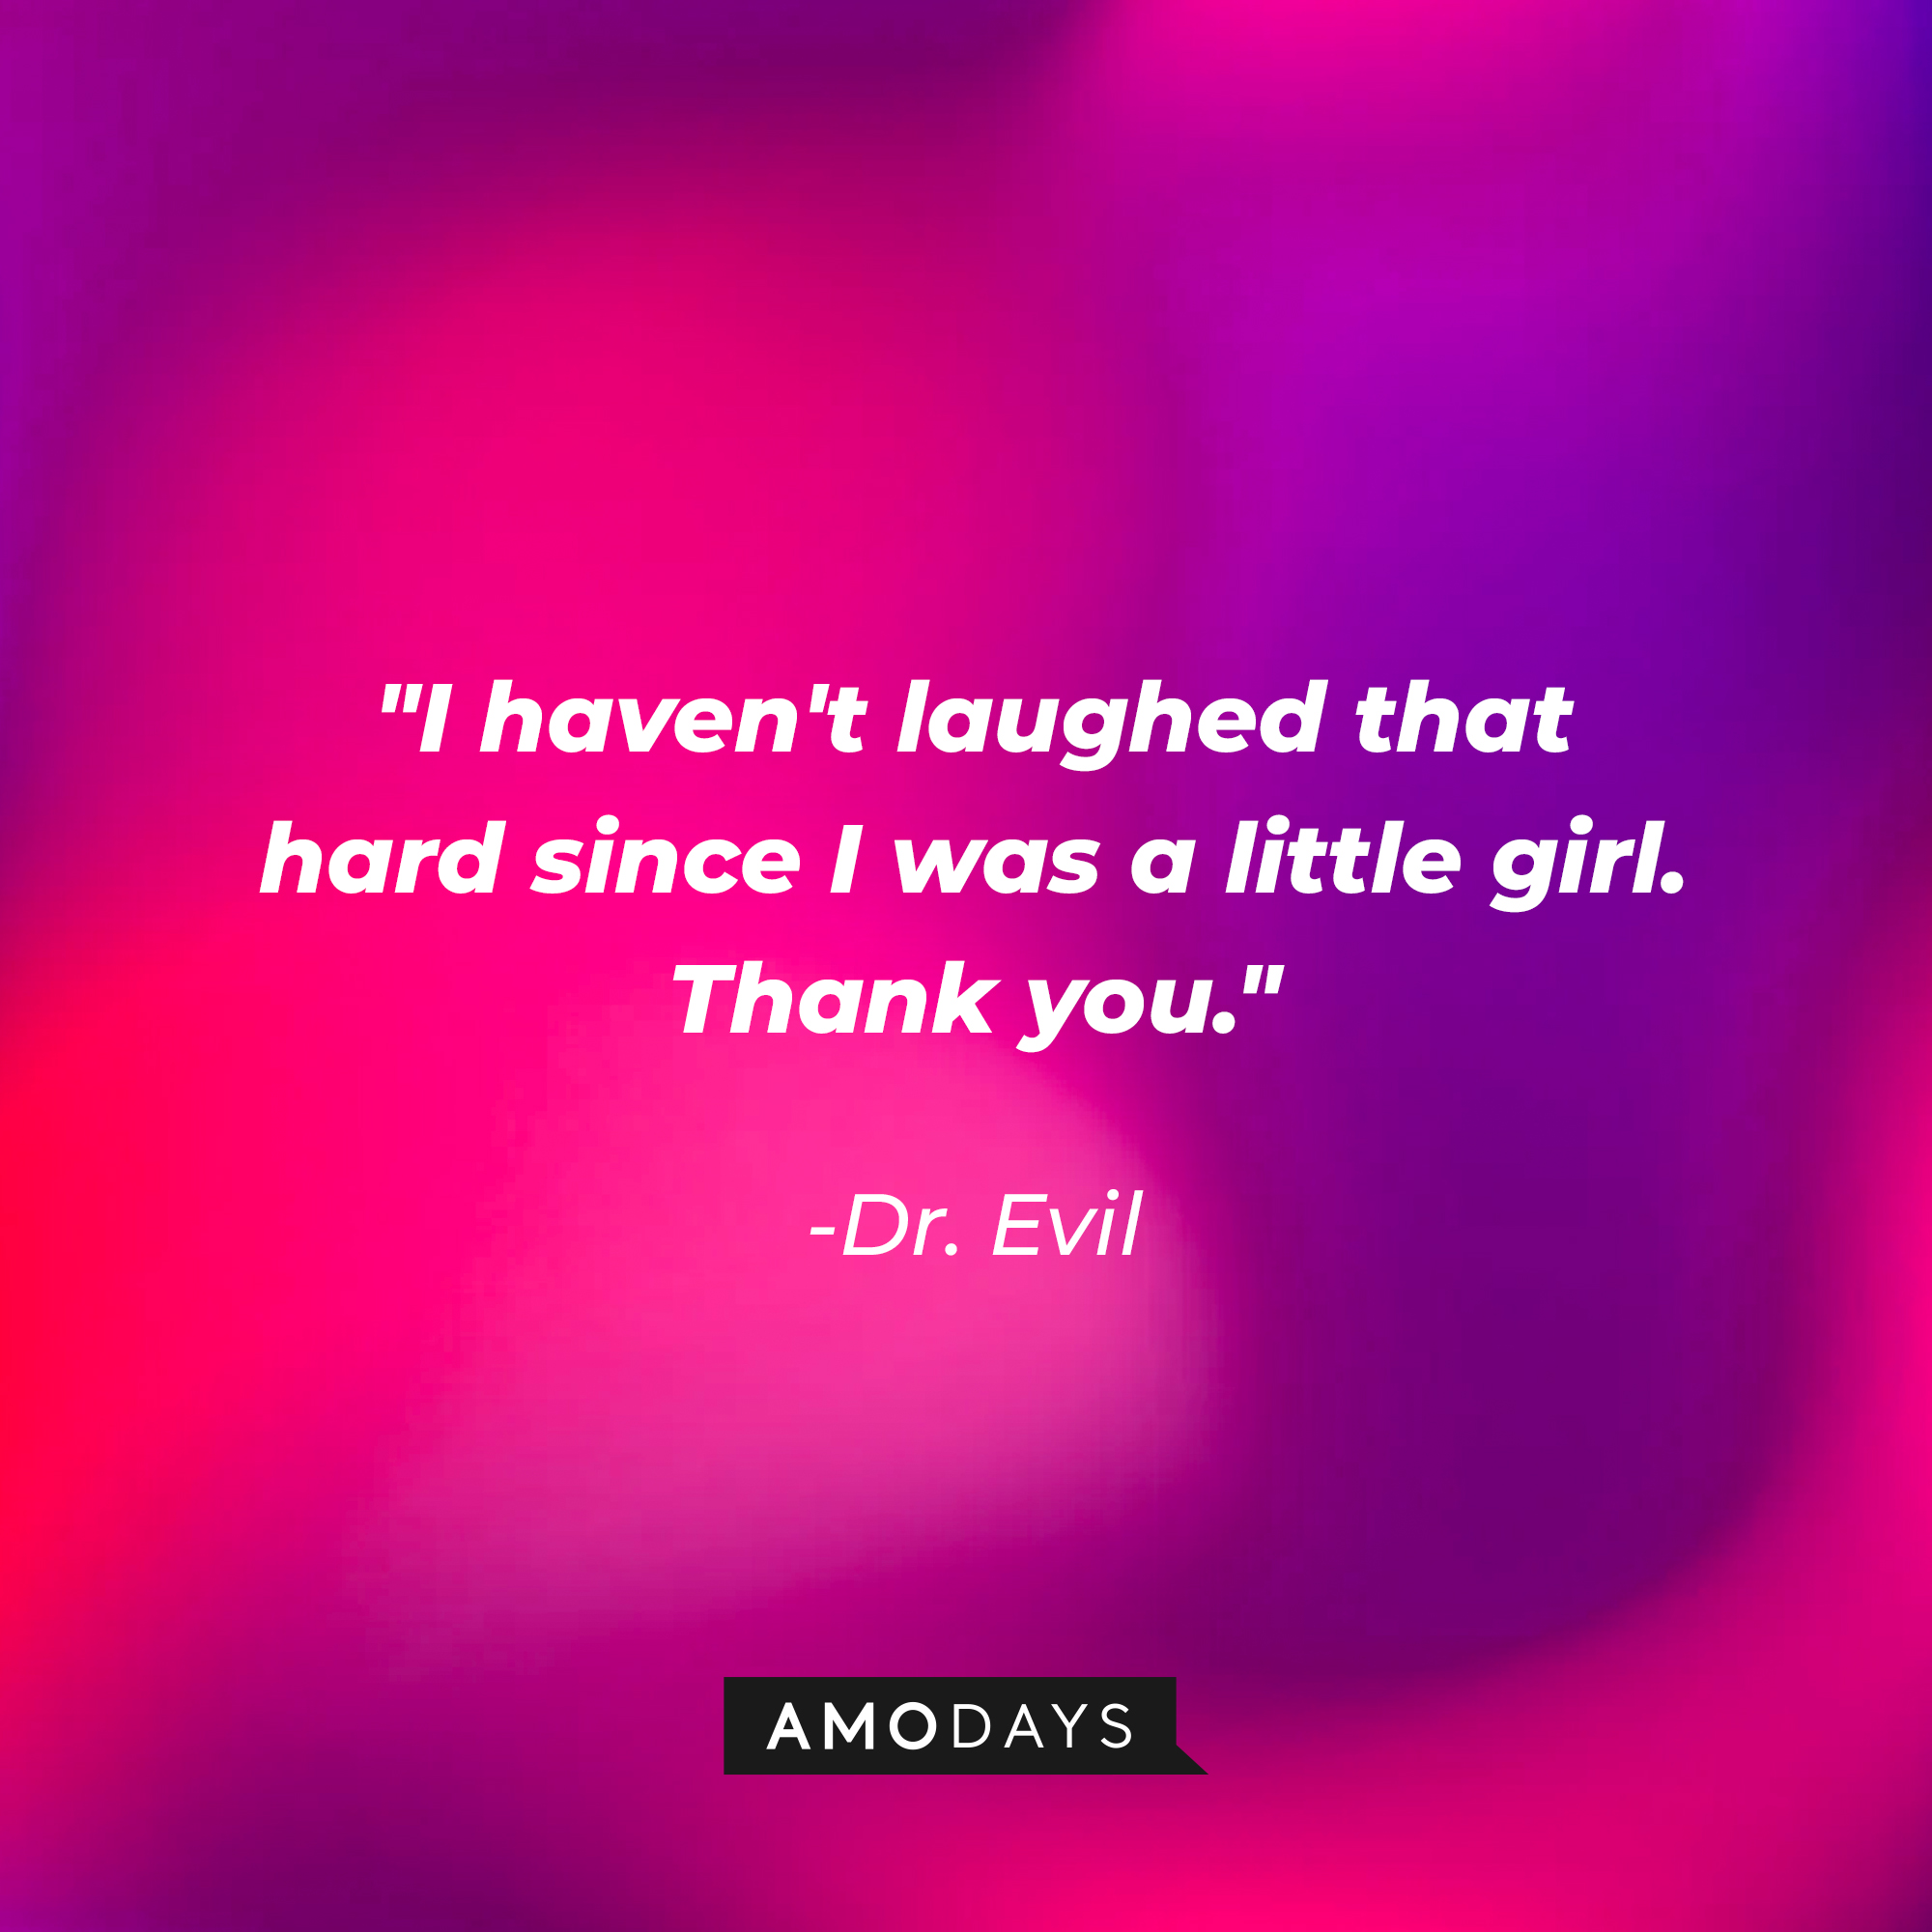 Dr. Evil's quote: “I haven't laughed that hard since I was a little girl. Thank you.” | Source: Amodays